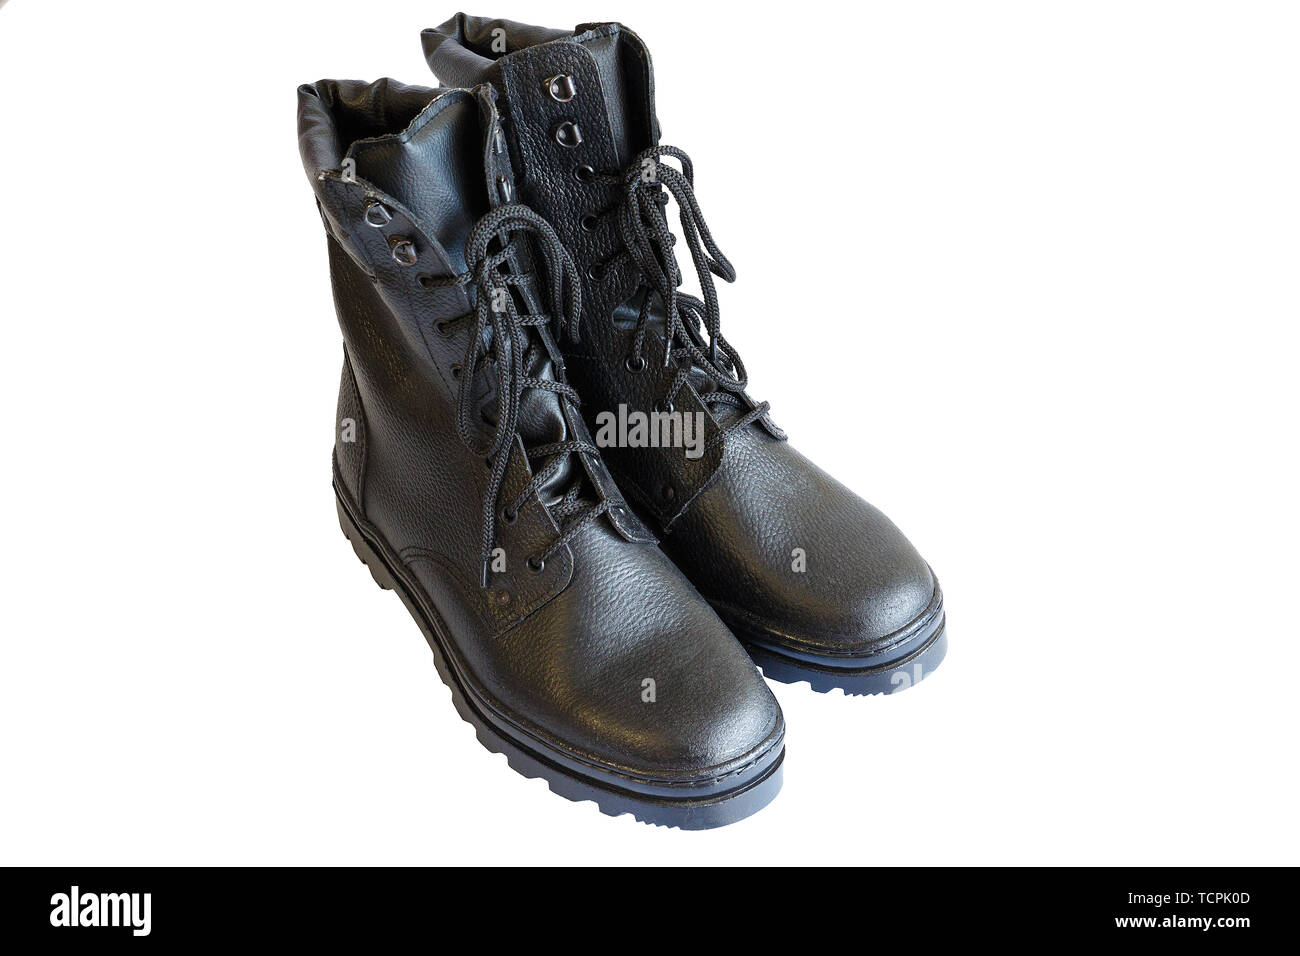 Black army boots on white background. Isolated. A pair of military ...